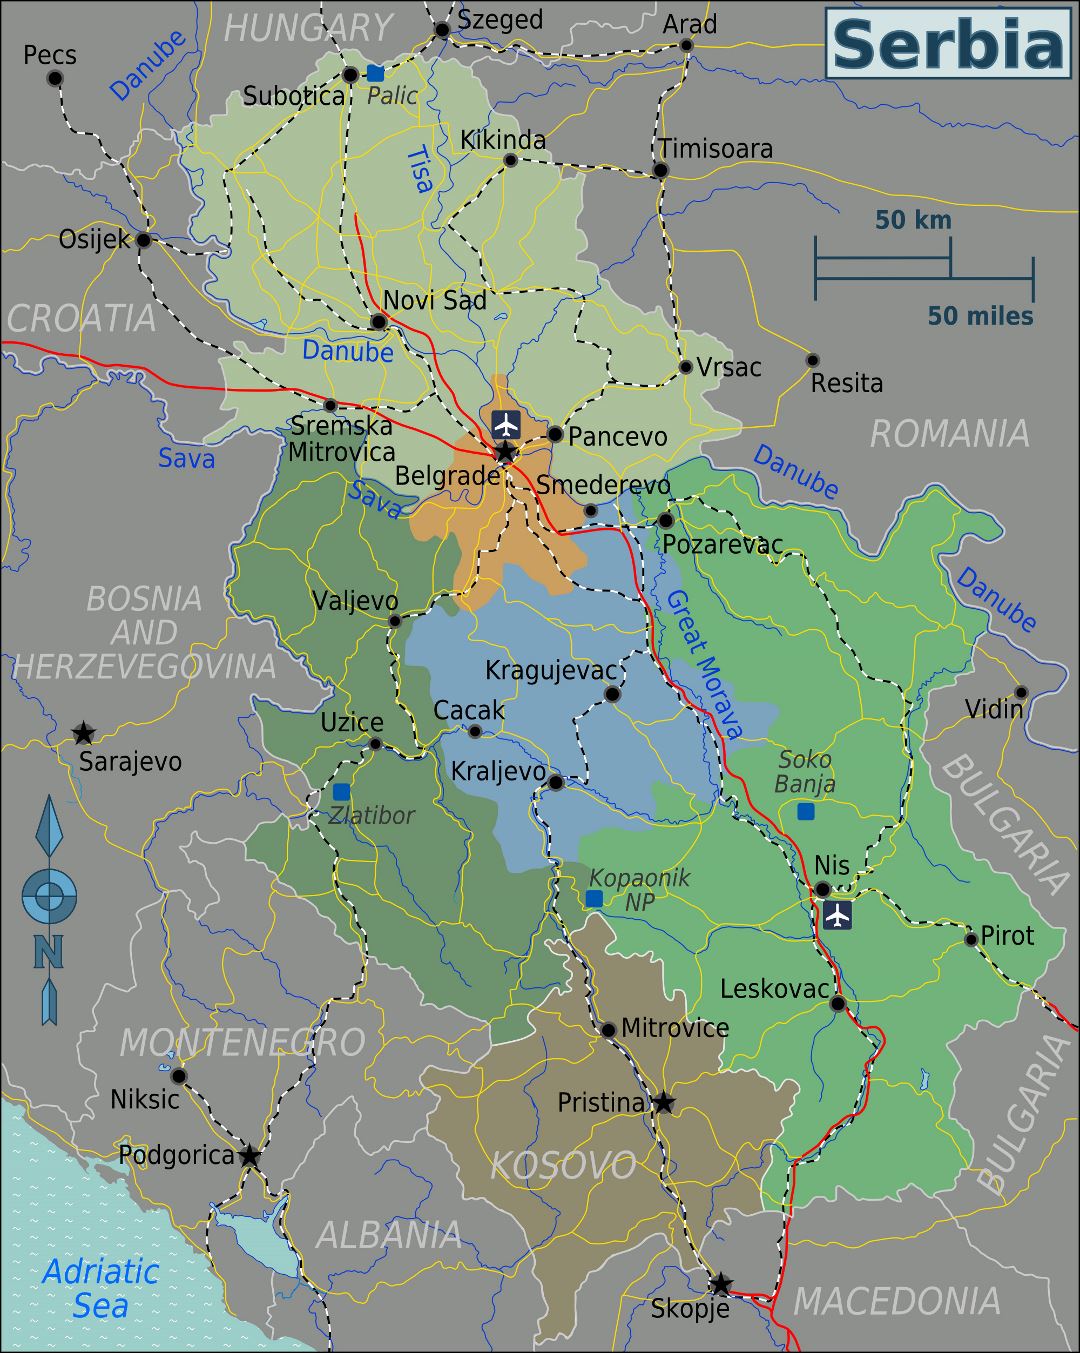 Large regions map of Serbia